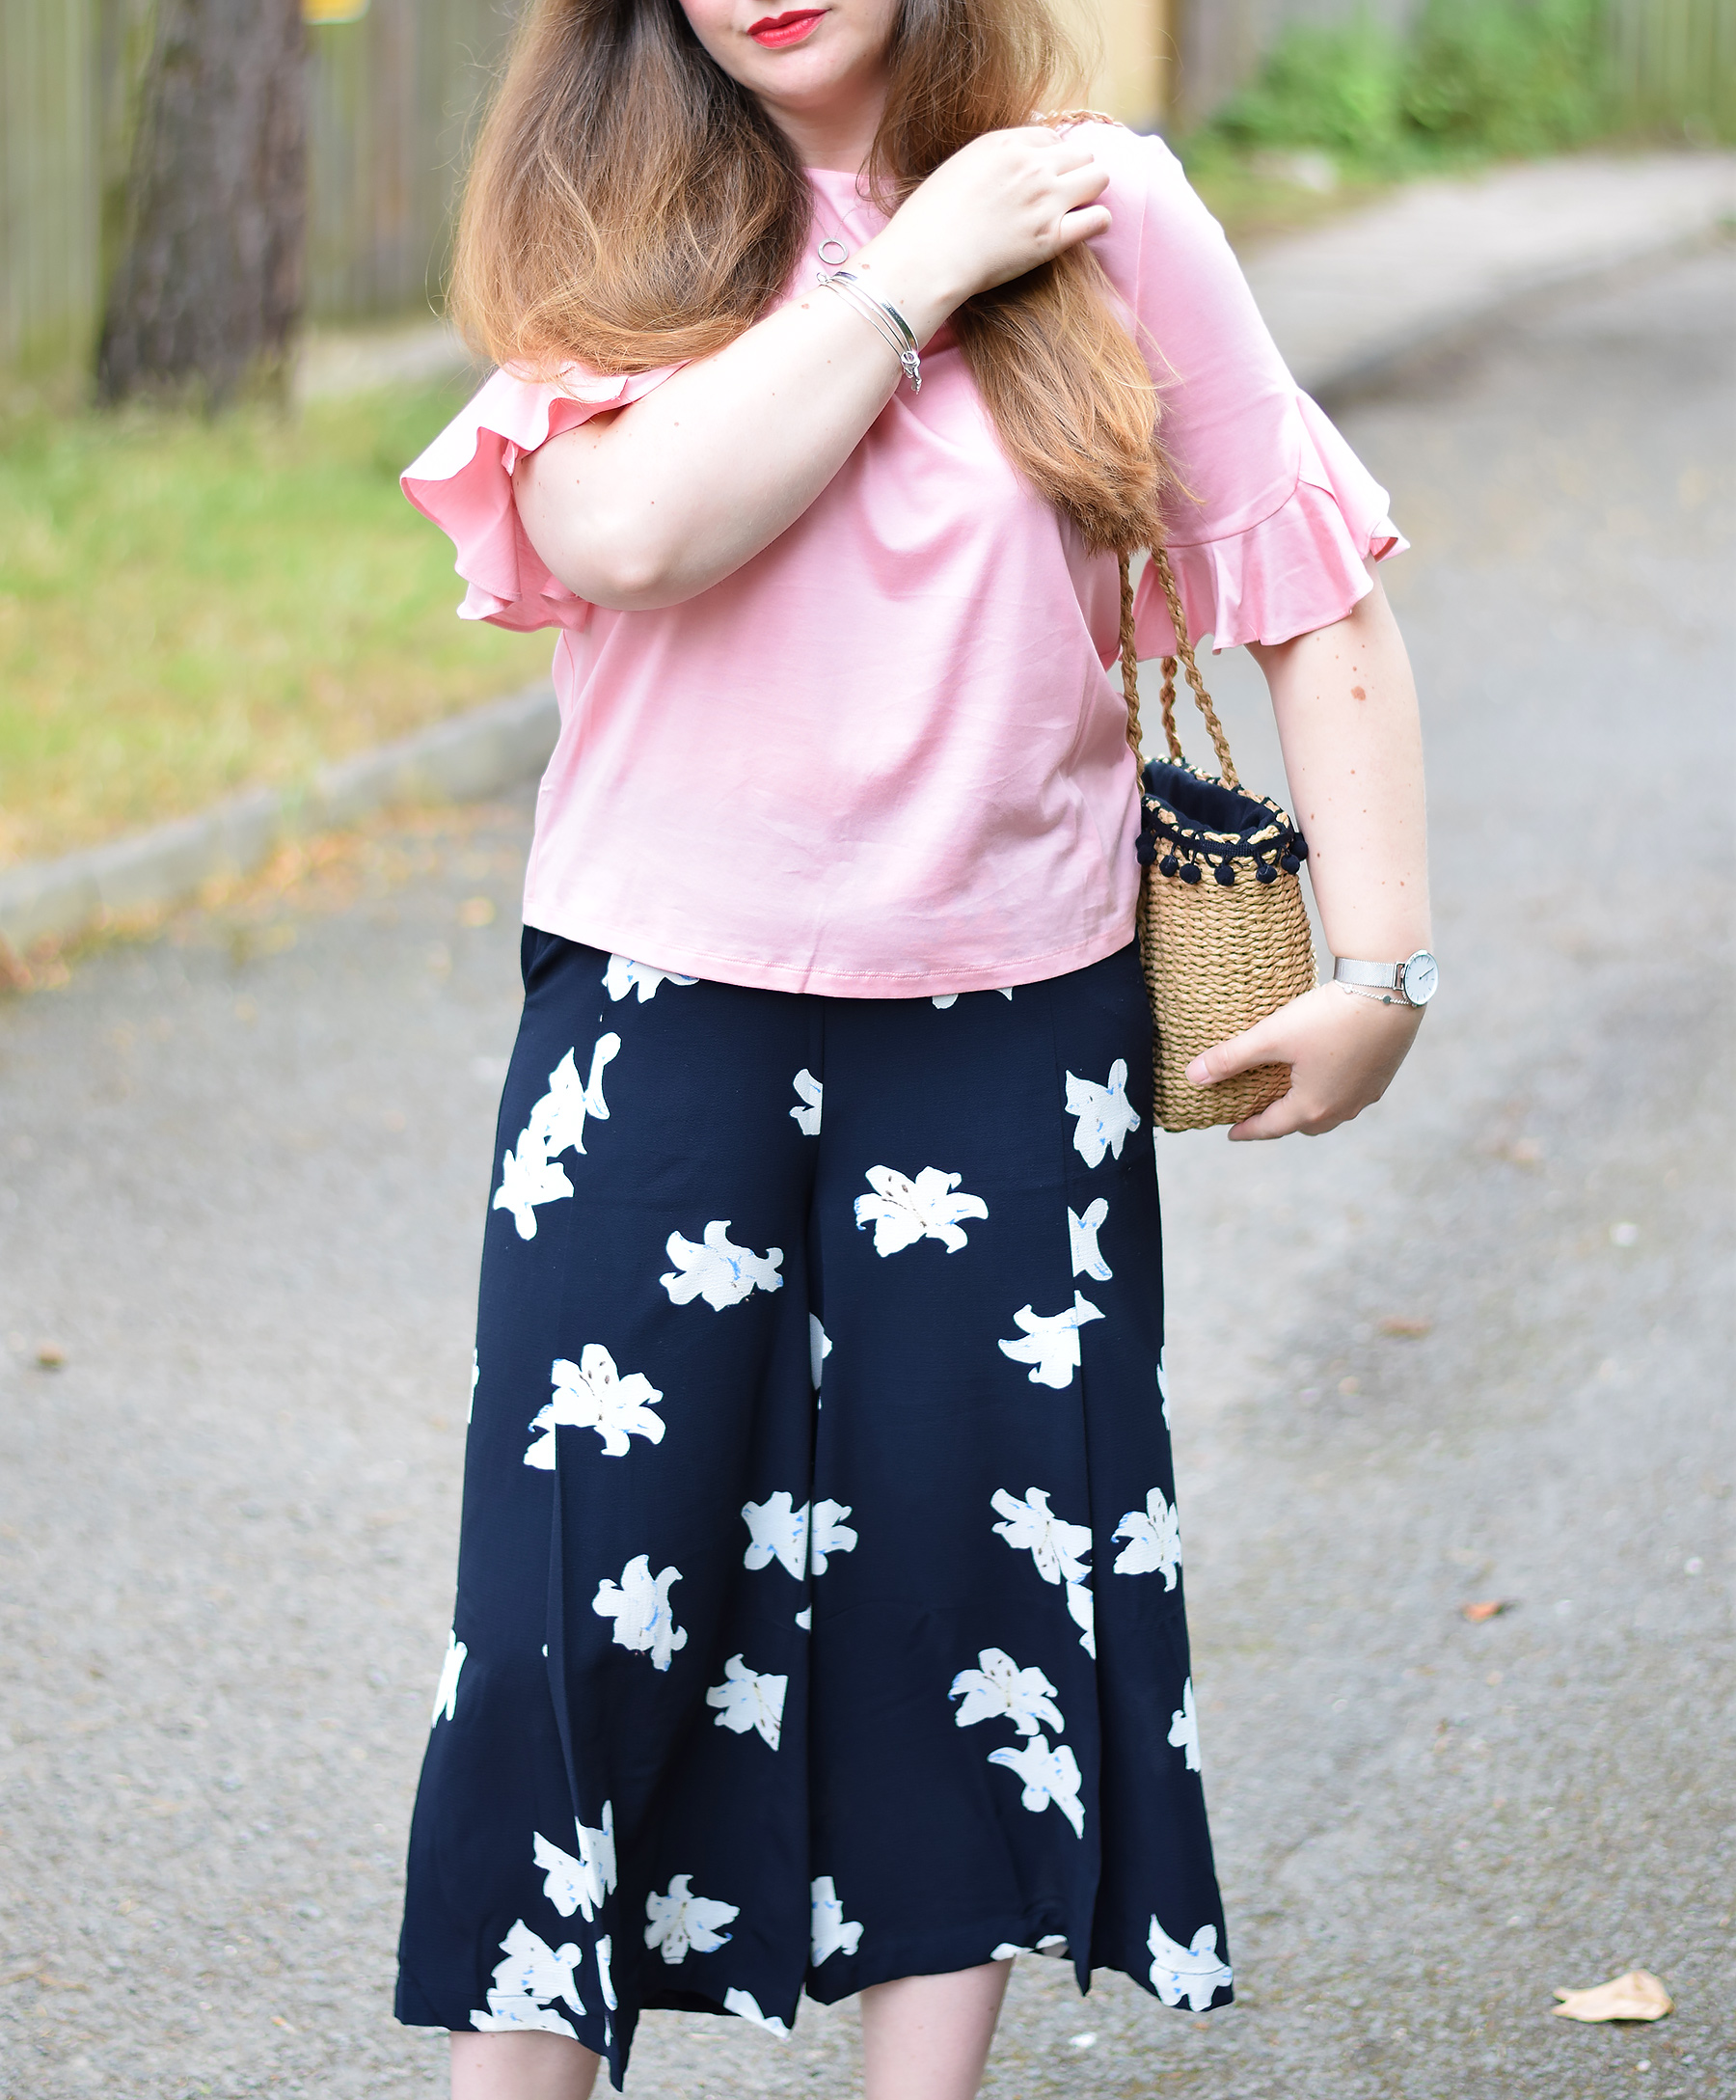 Pink t-shirt and navy culottes Outfit